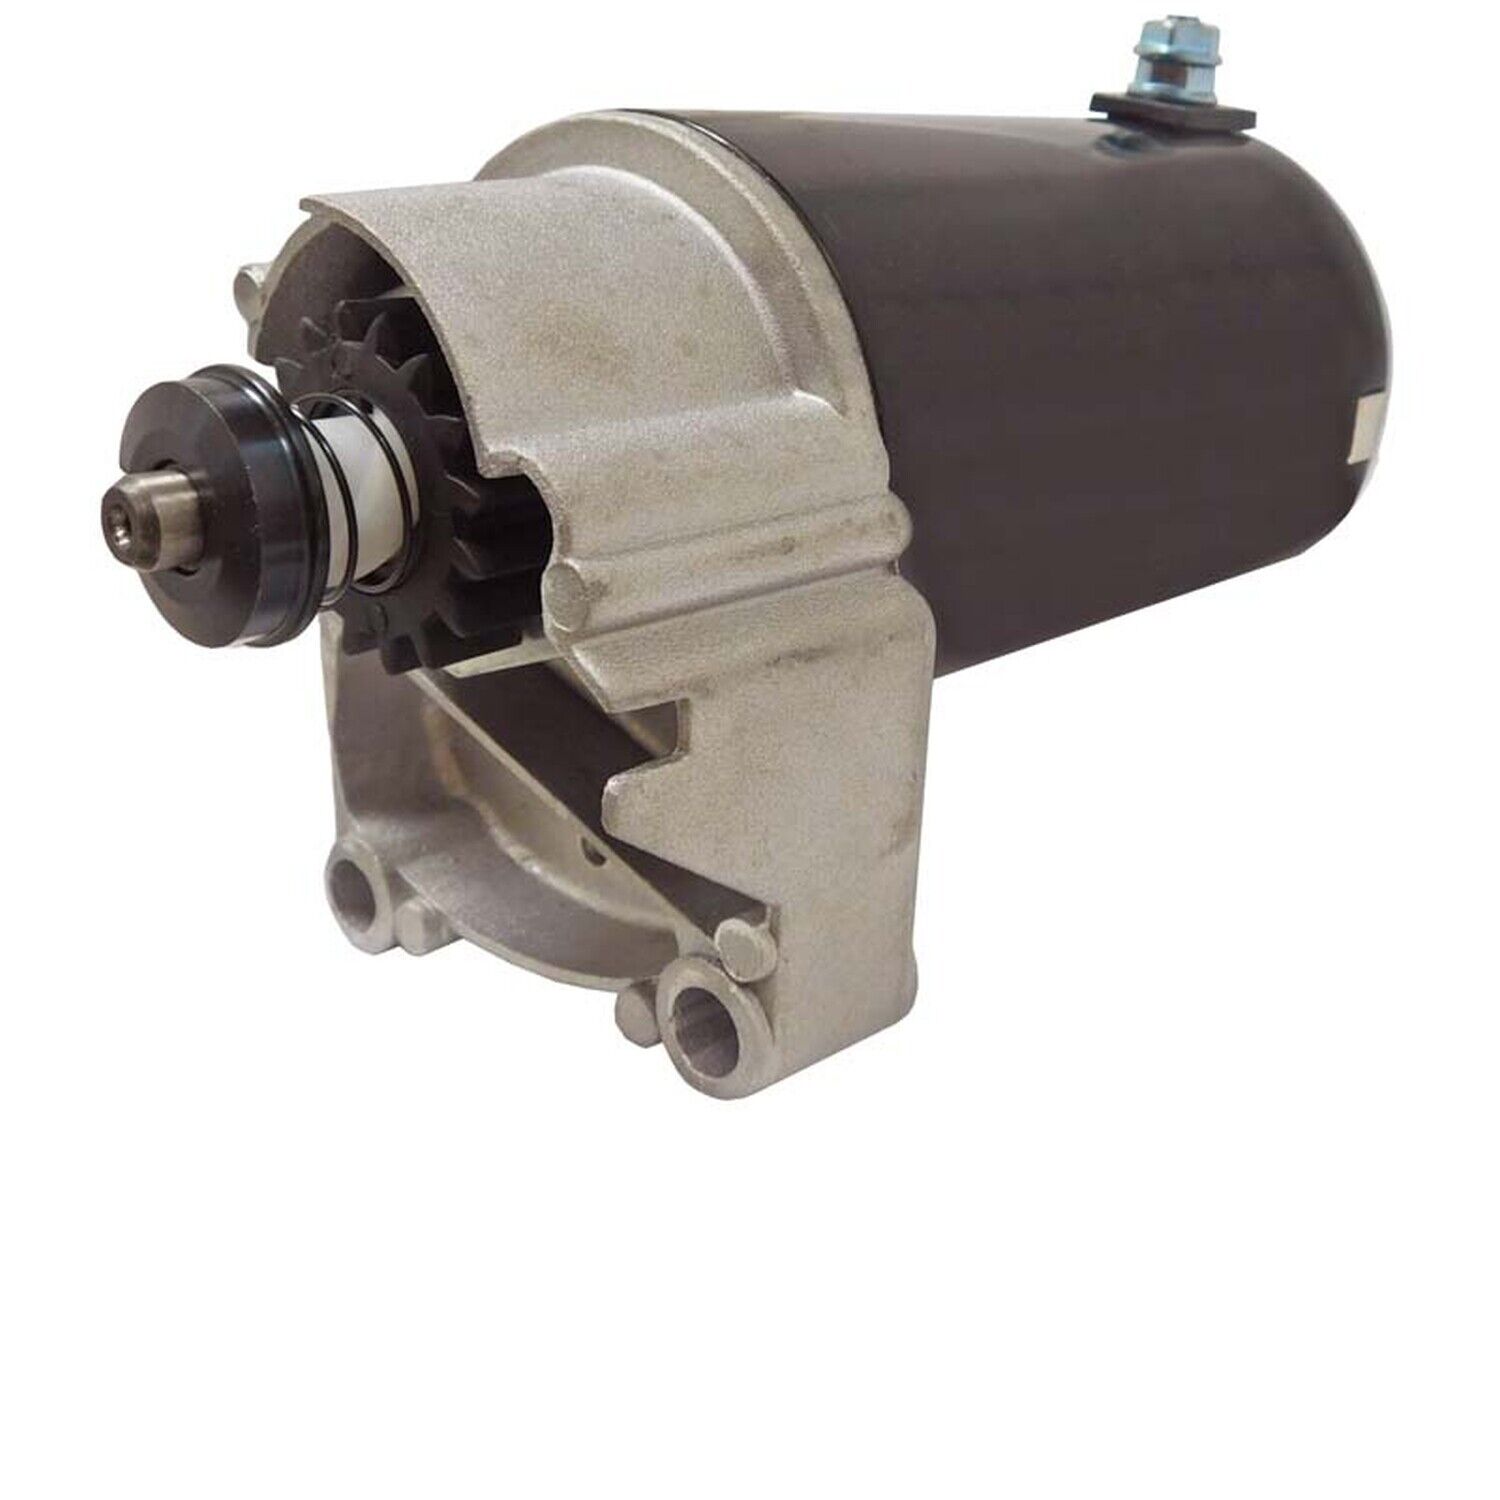 New Starter For Briggs V Twin Cylinder HD 14 16 18 HP 399928 498148